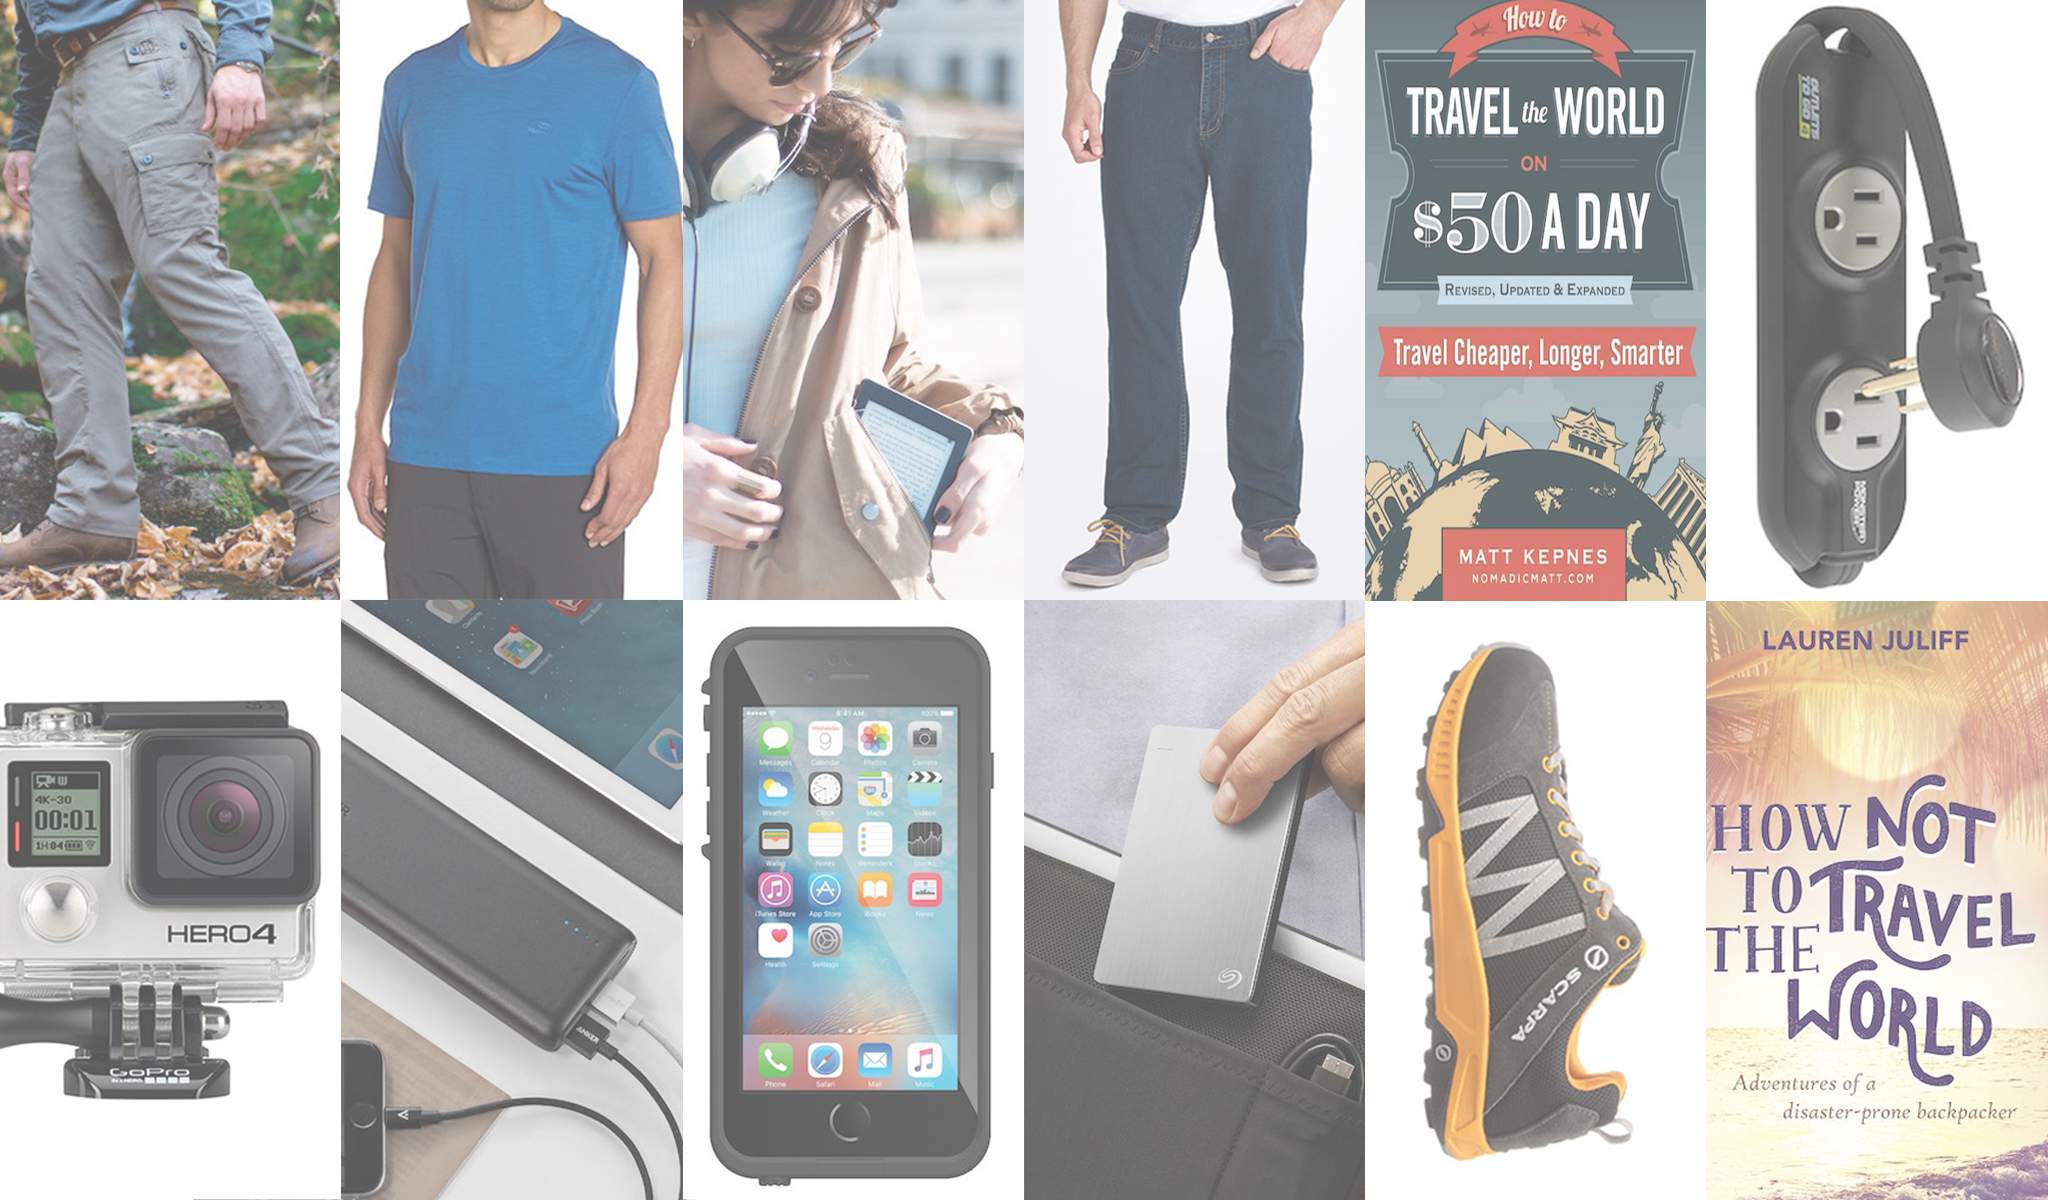 A collage featuring various travel-related items and actions: a person with a backpack, smartphones, a camera, a travel adapter, skateboarding, and two travel books.